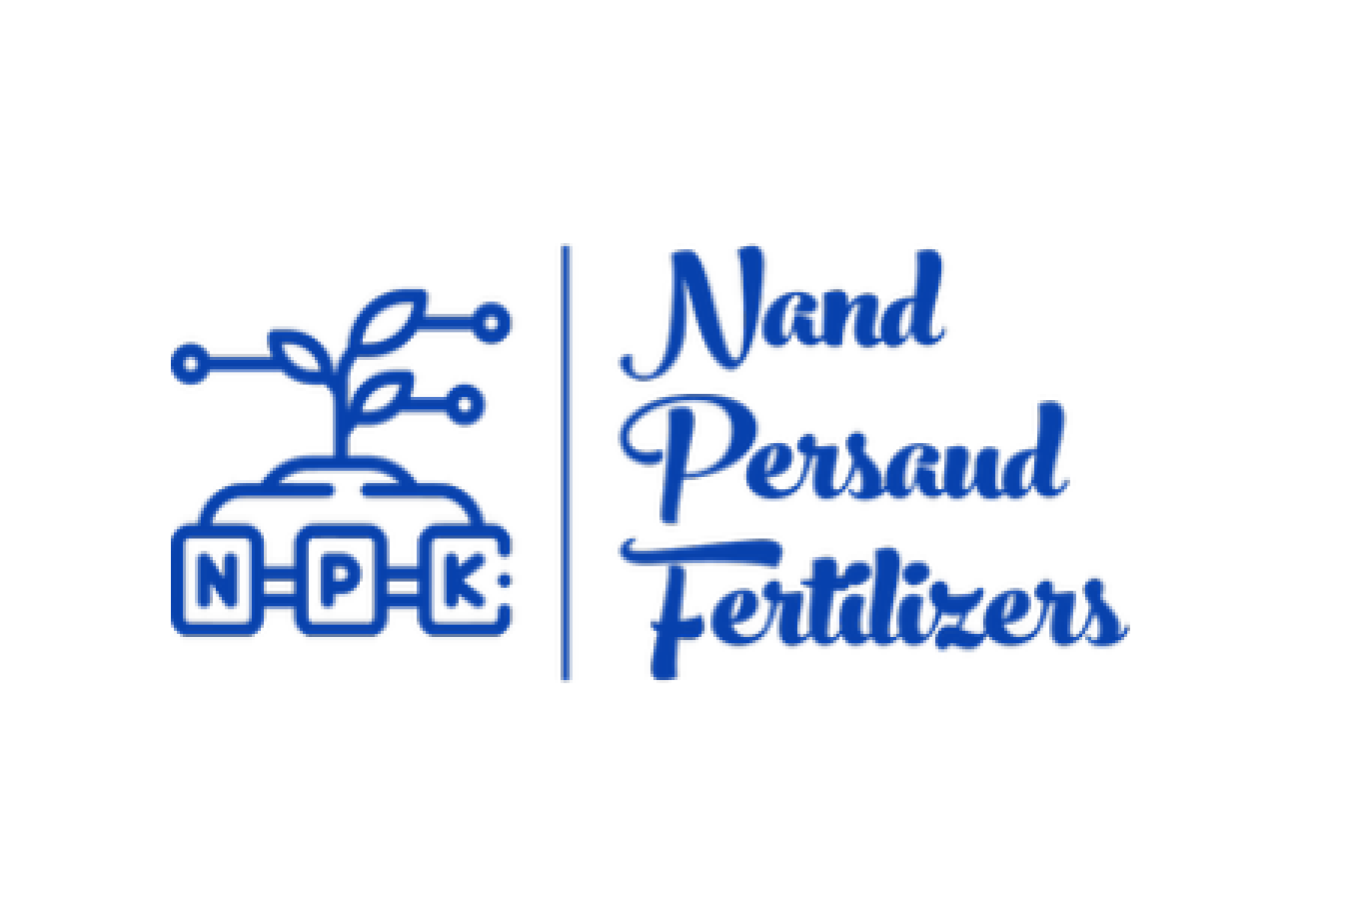 Nand-Persaud-Fertilizers.png